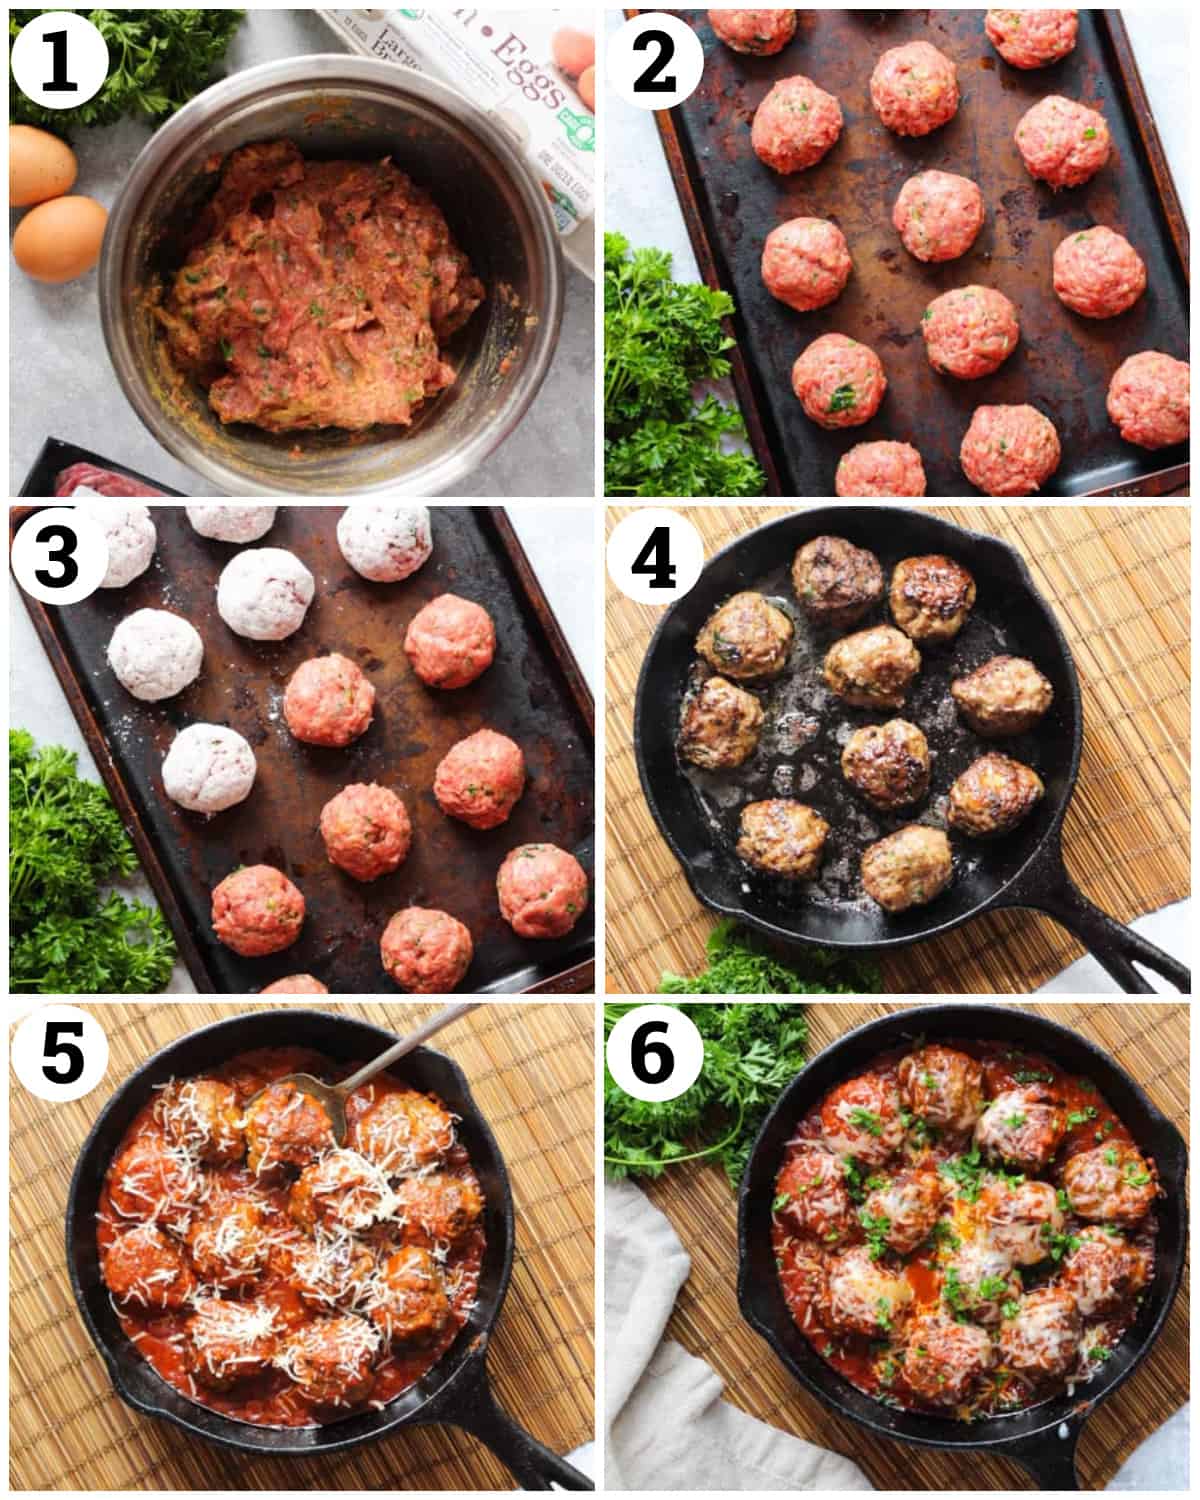 mix all the ingredients, form the meatballs and then roll in flour. Then sear and cook in sauce. Top with cheese. 